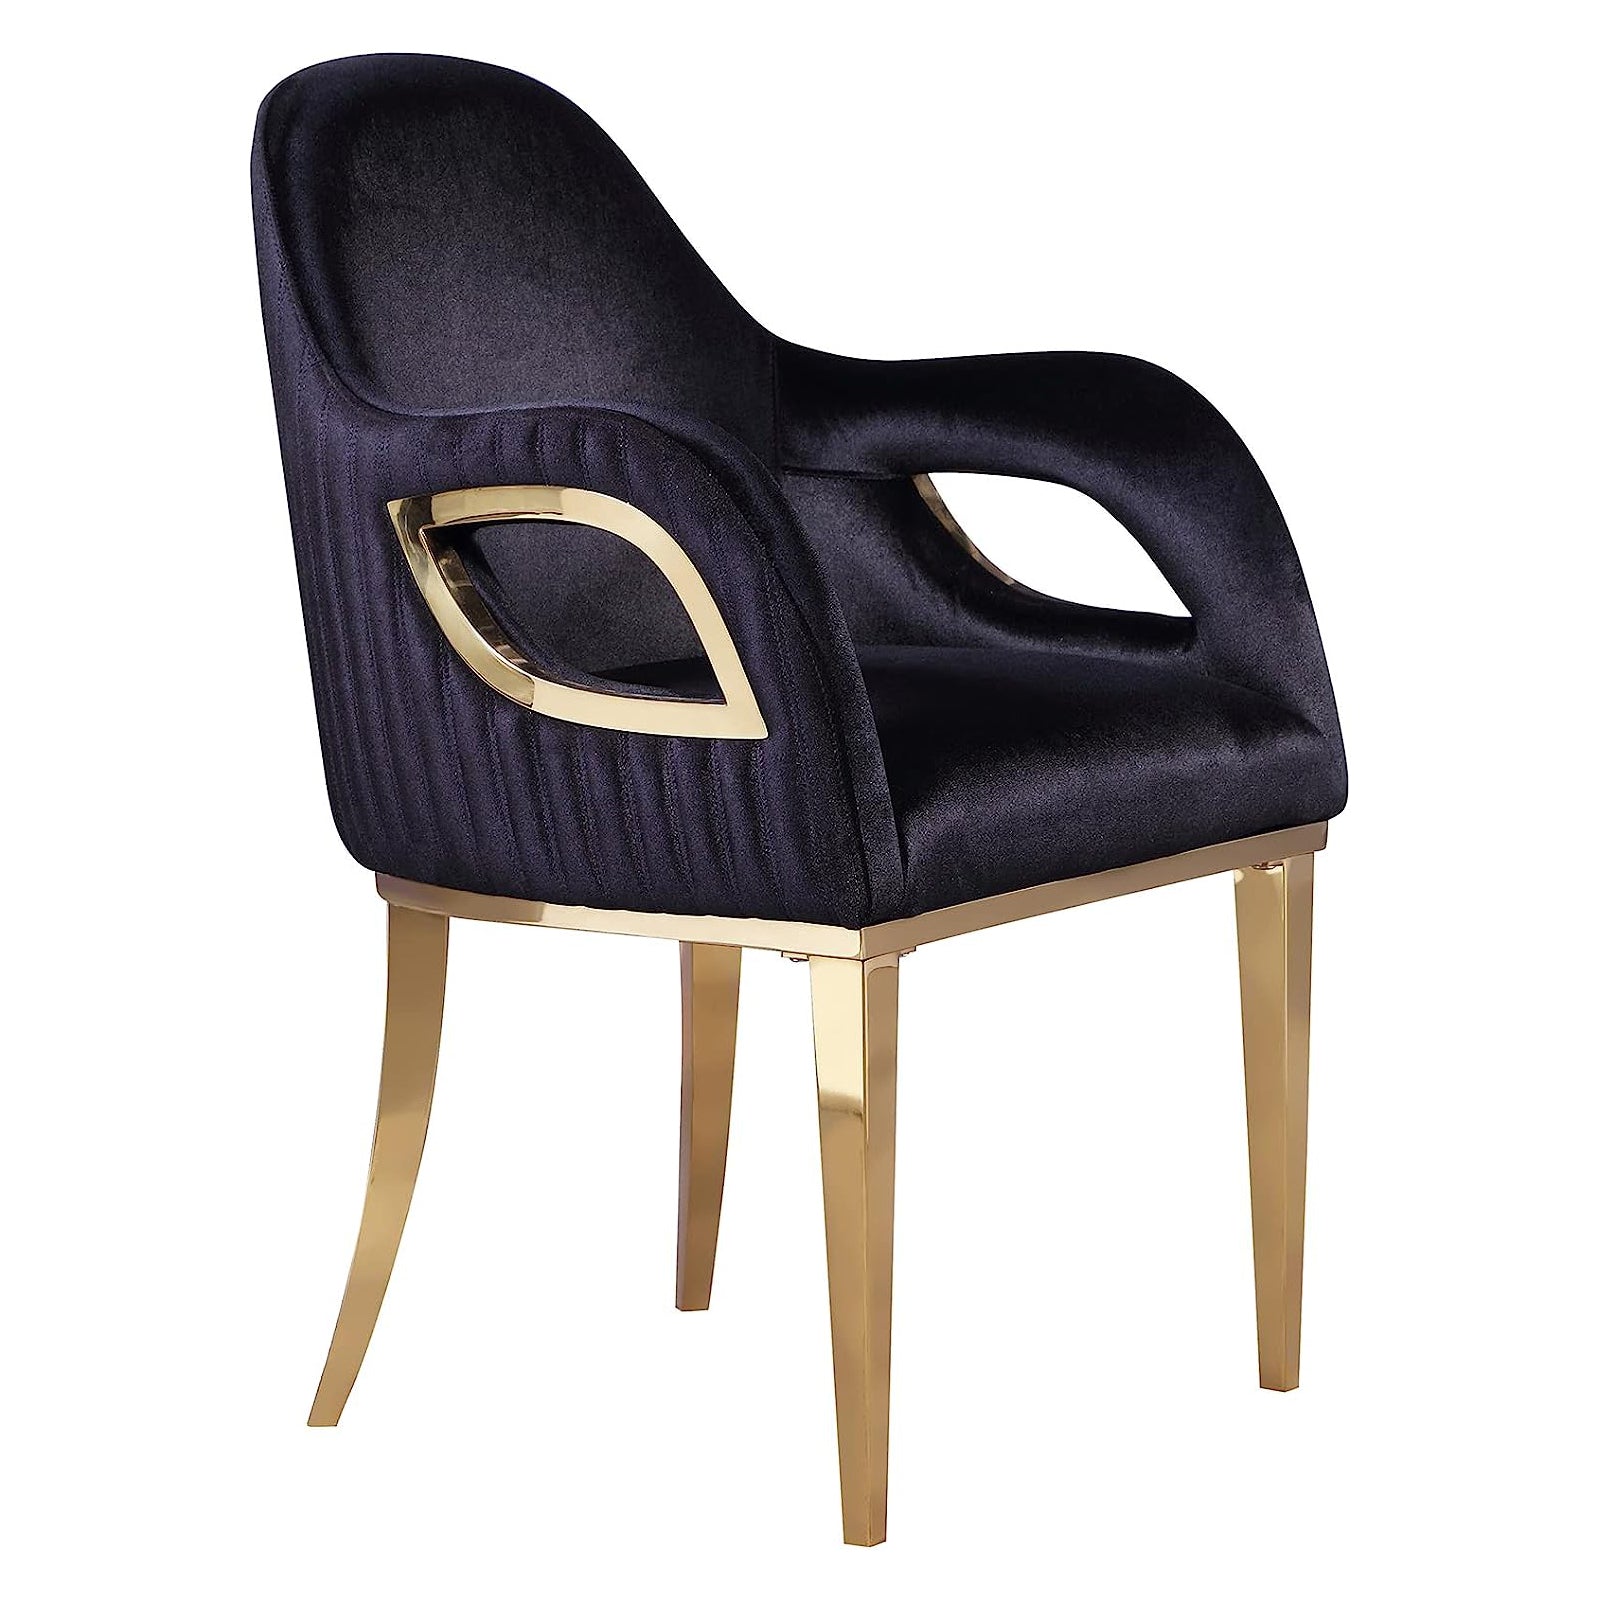 Enhance Your Dining Experience with the Asday Exquisite Black Dining Chair